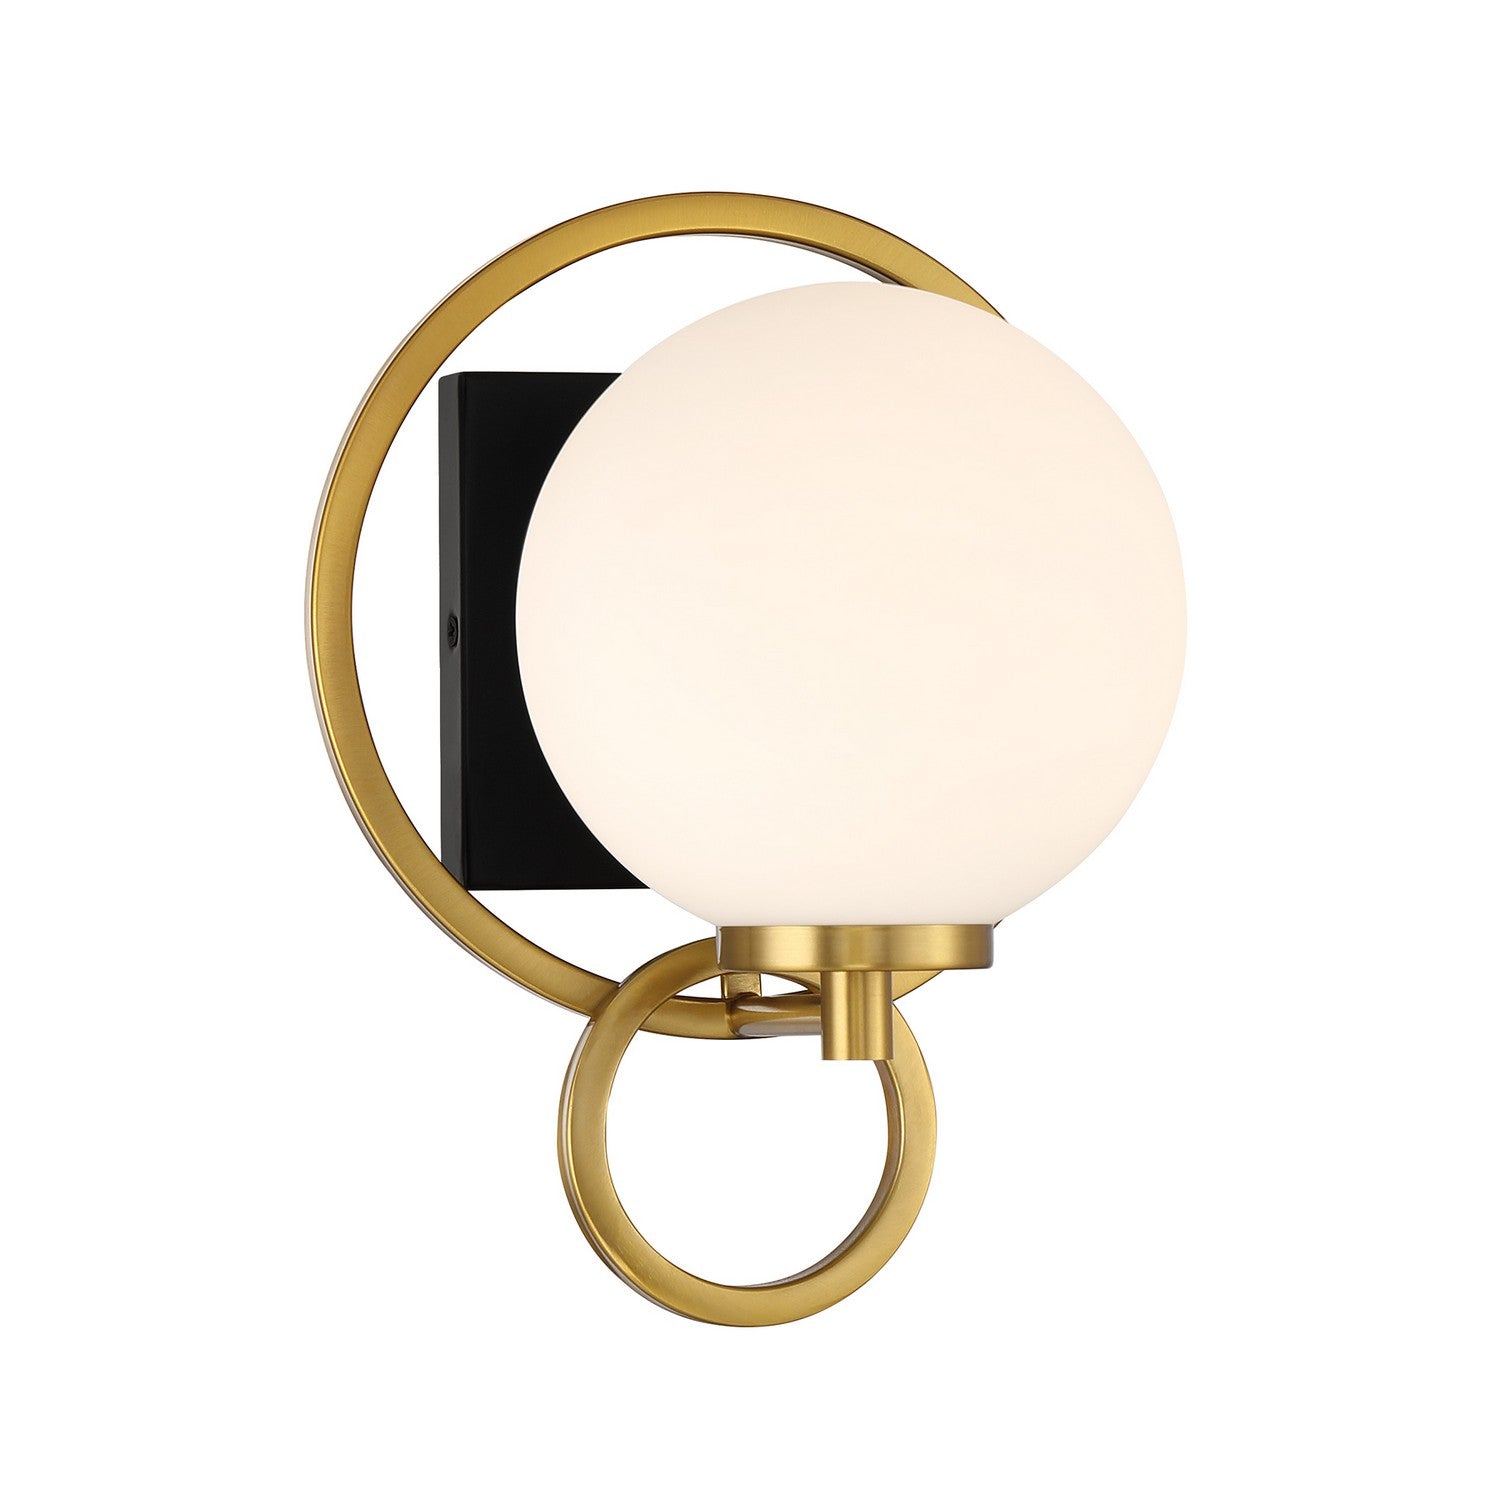 Savoy House - 9-6180-1-143 - One Light Wall Sconce - Alhambra - Matte Black with Warm Brass